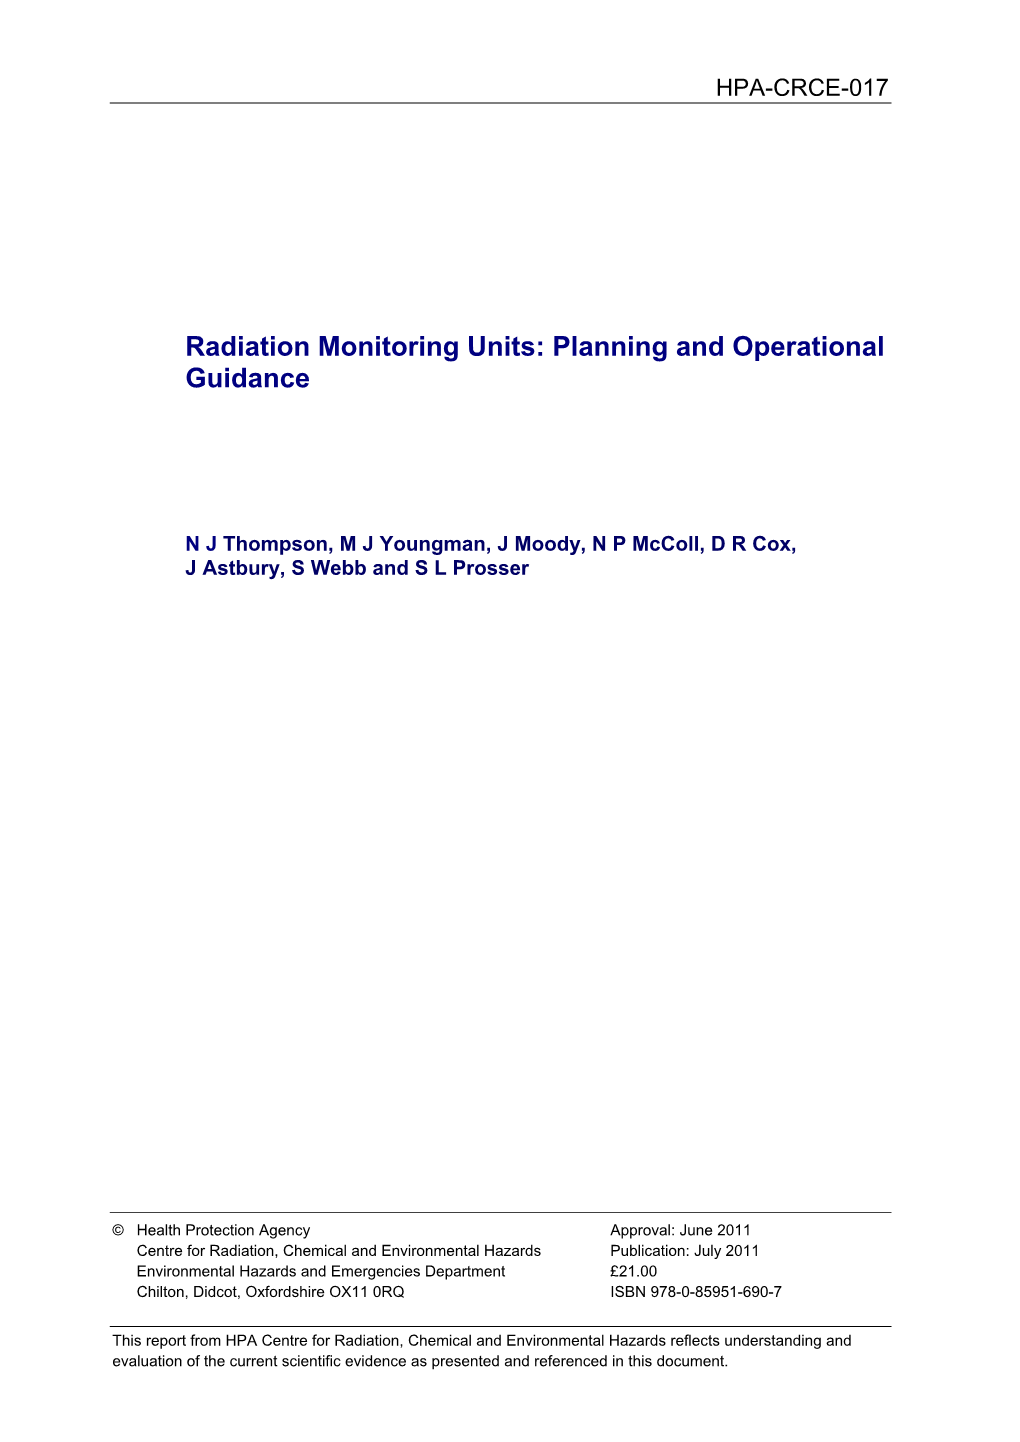 Radiation Monitoring Units: Planning and Operational Guidance